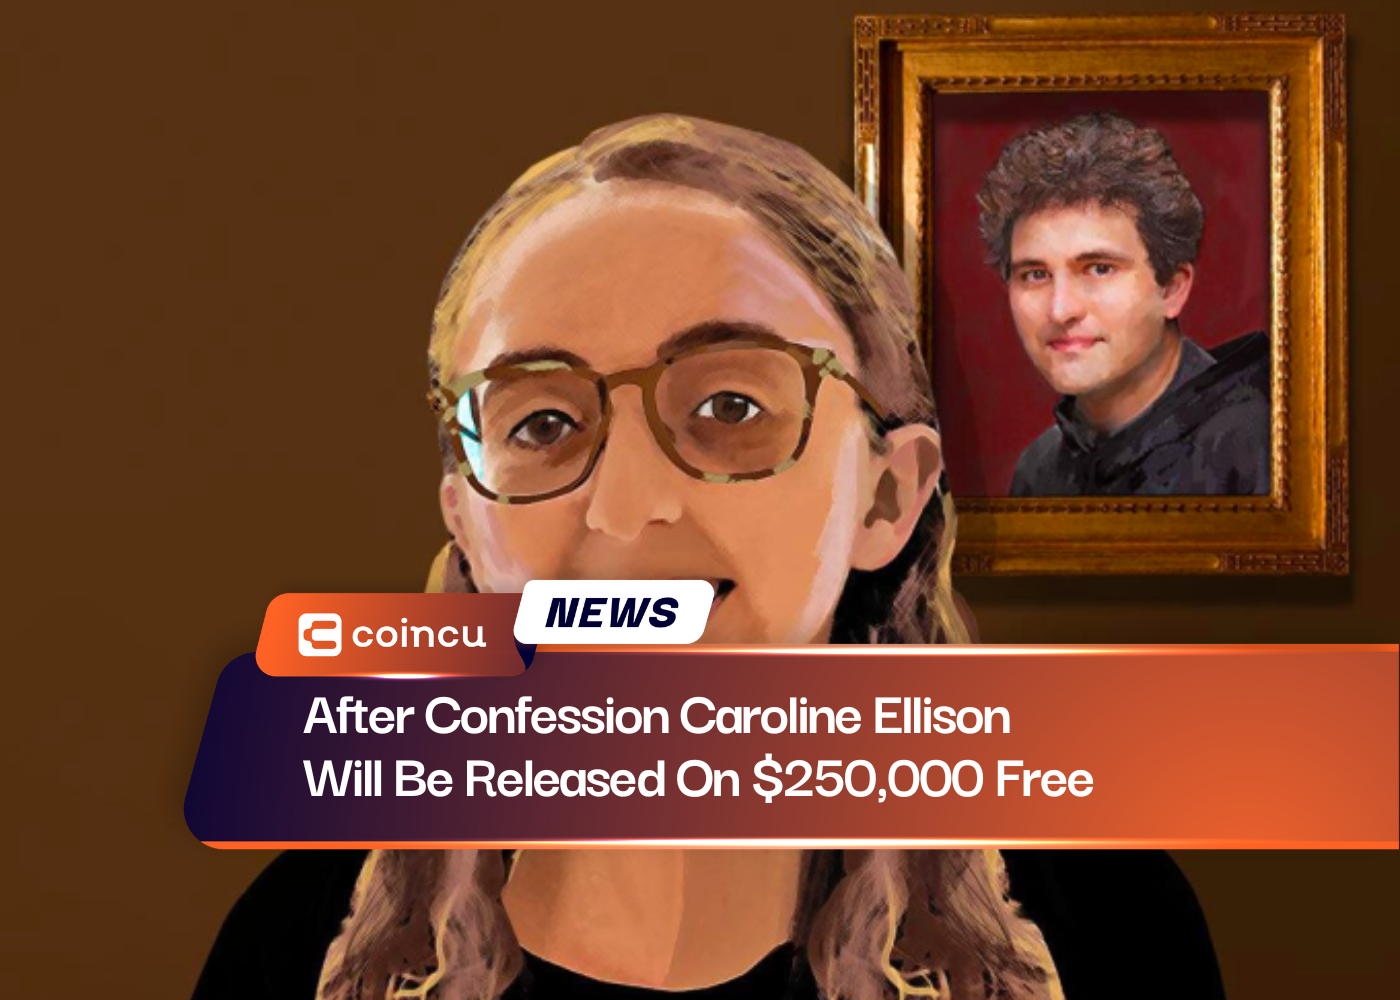 After Confession Caroline Ellison Will Be Released On $250,000 Free